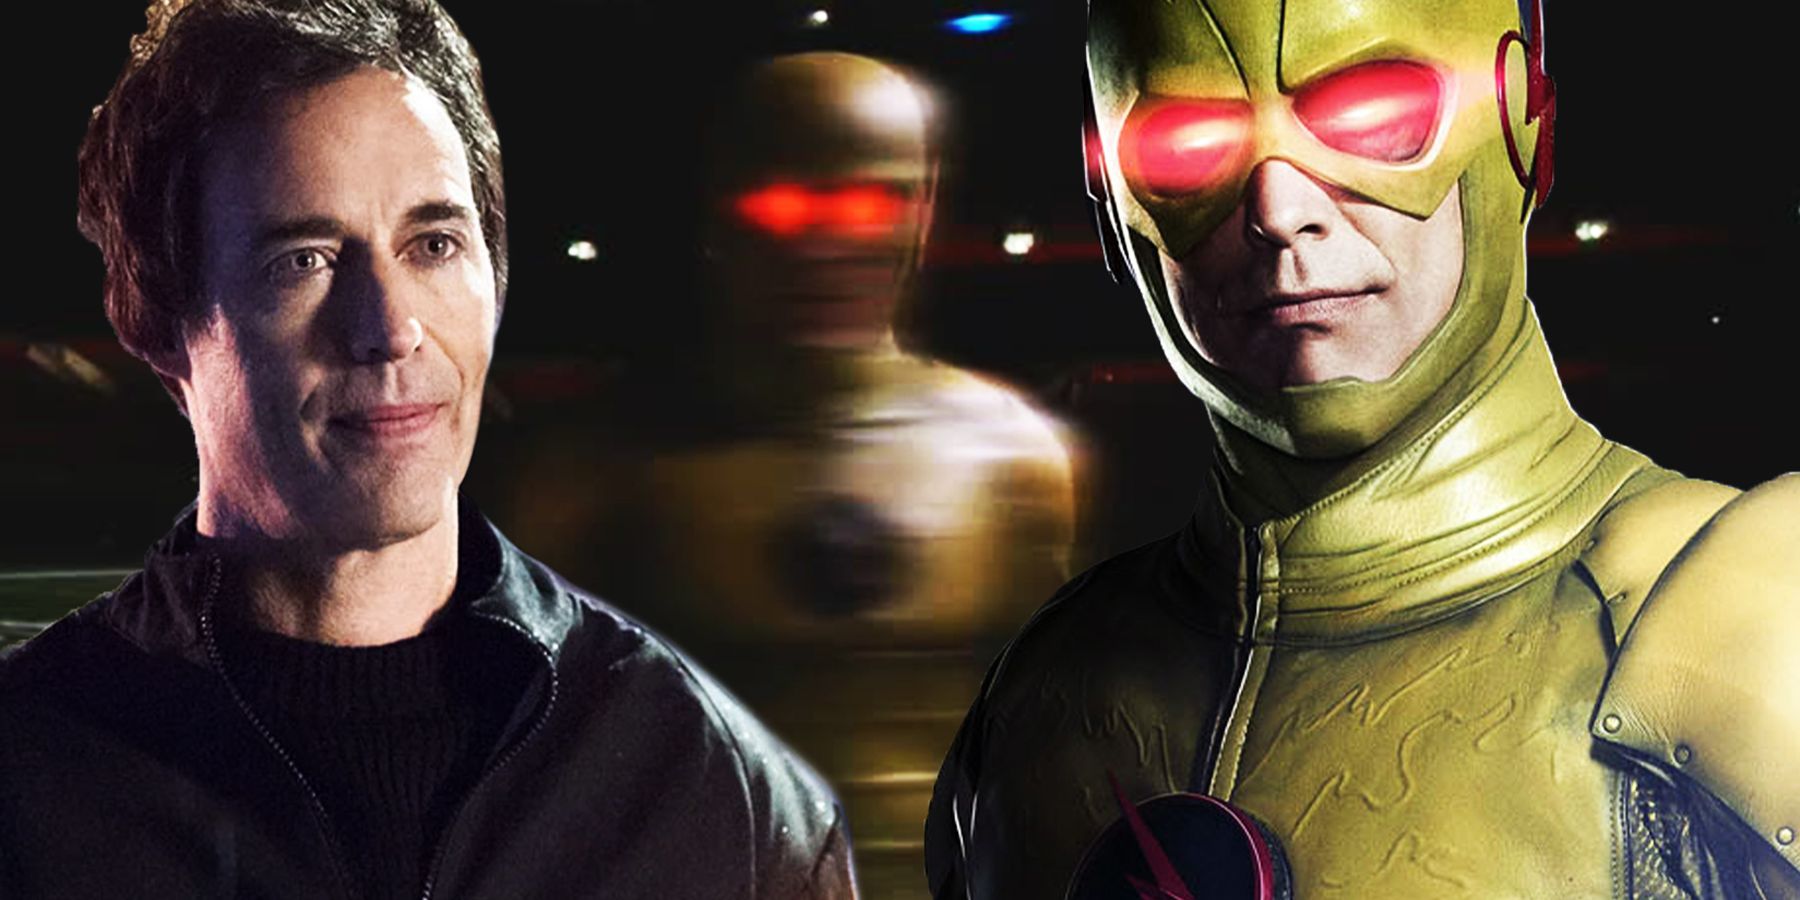 Tom Cavanagh as Eobard Thawne and Reverse Flash from tv show The Flash